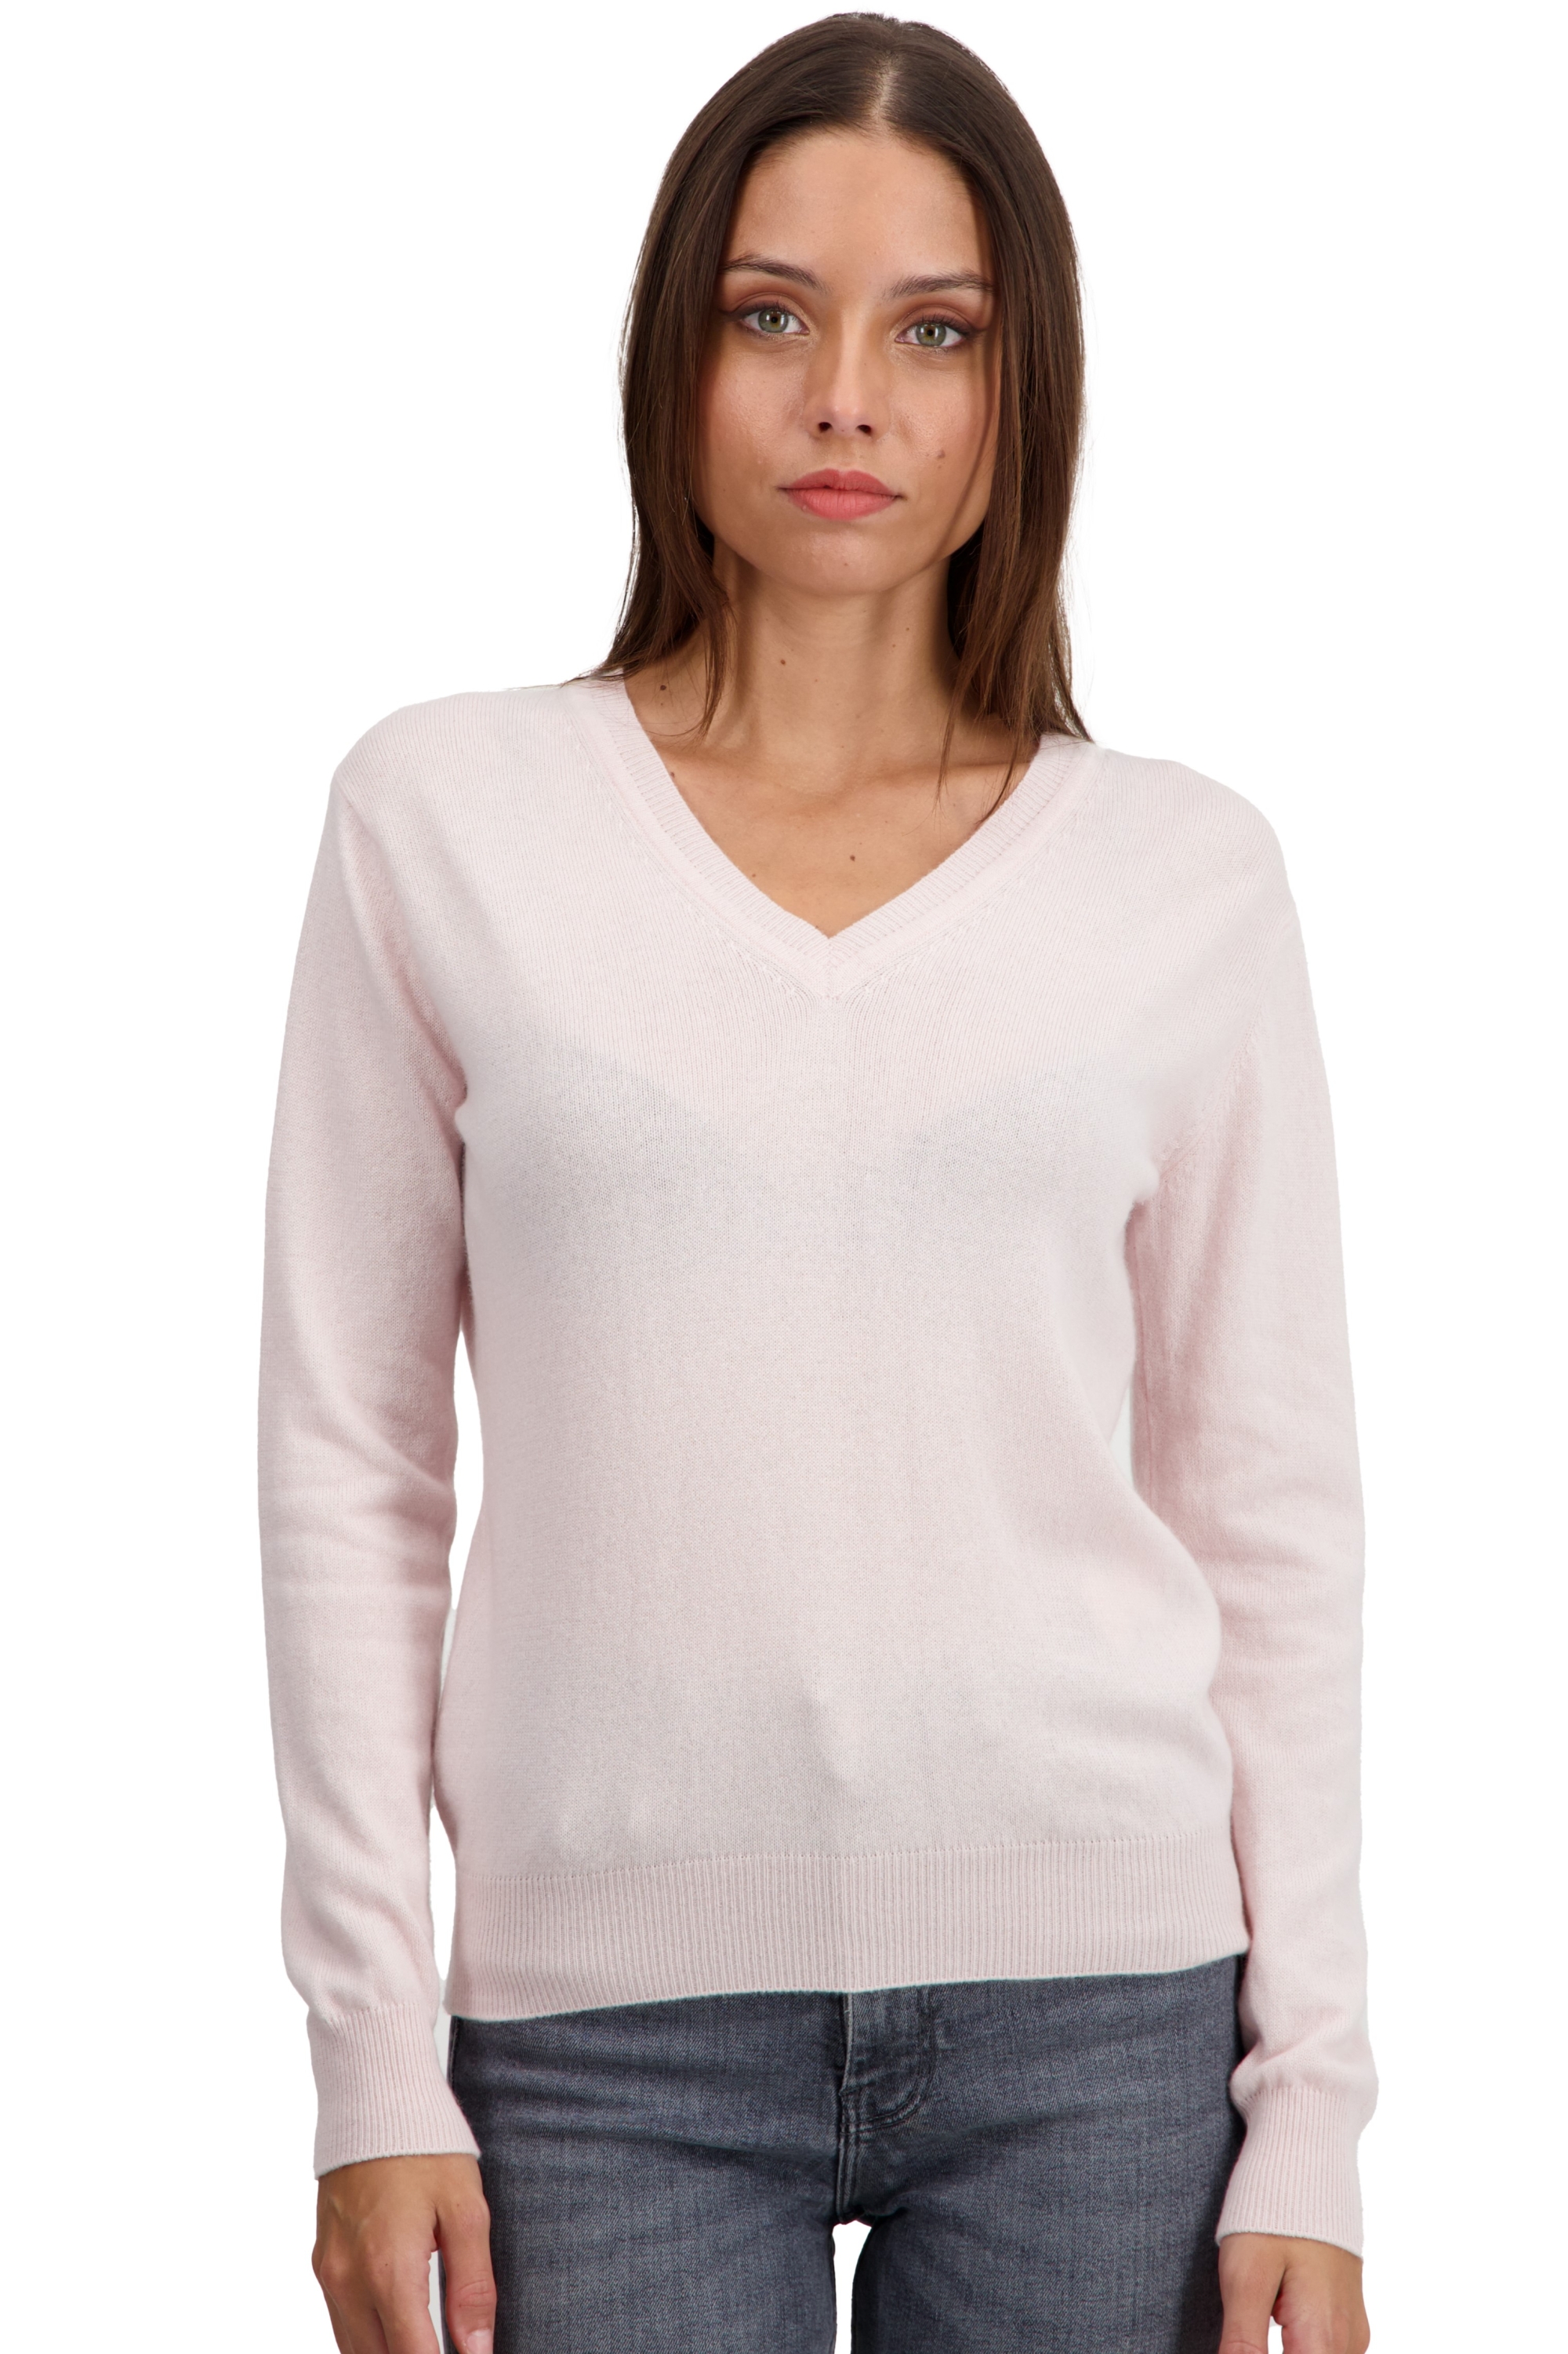 Cachemire pull femme faustine rose pale s